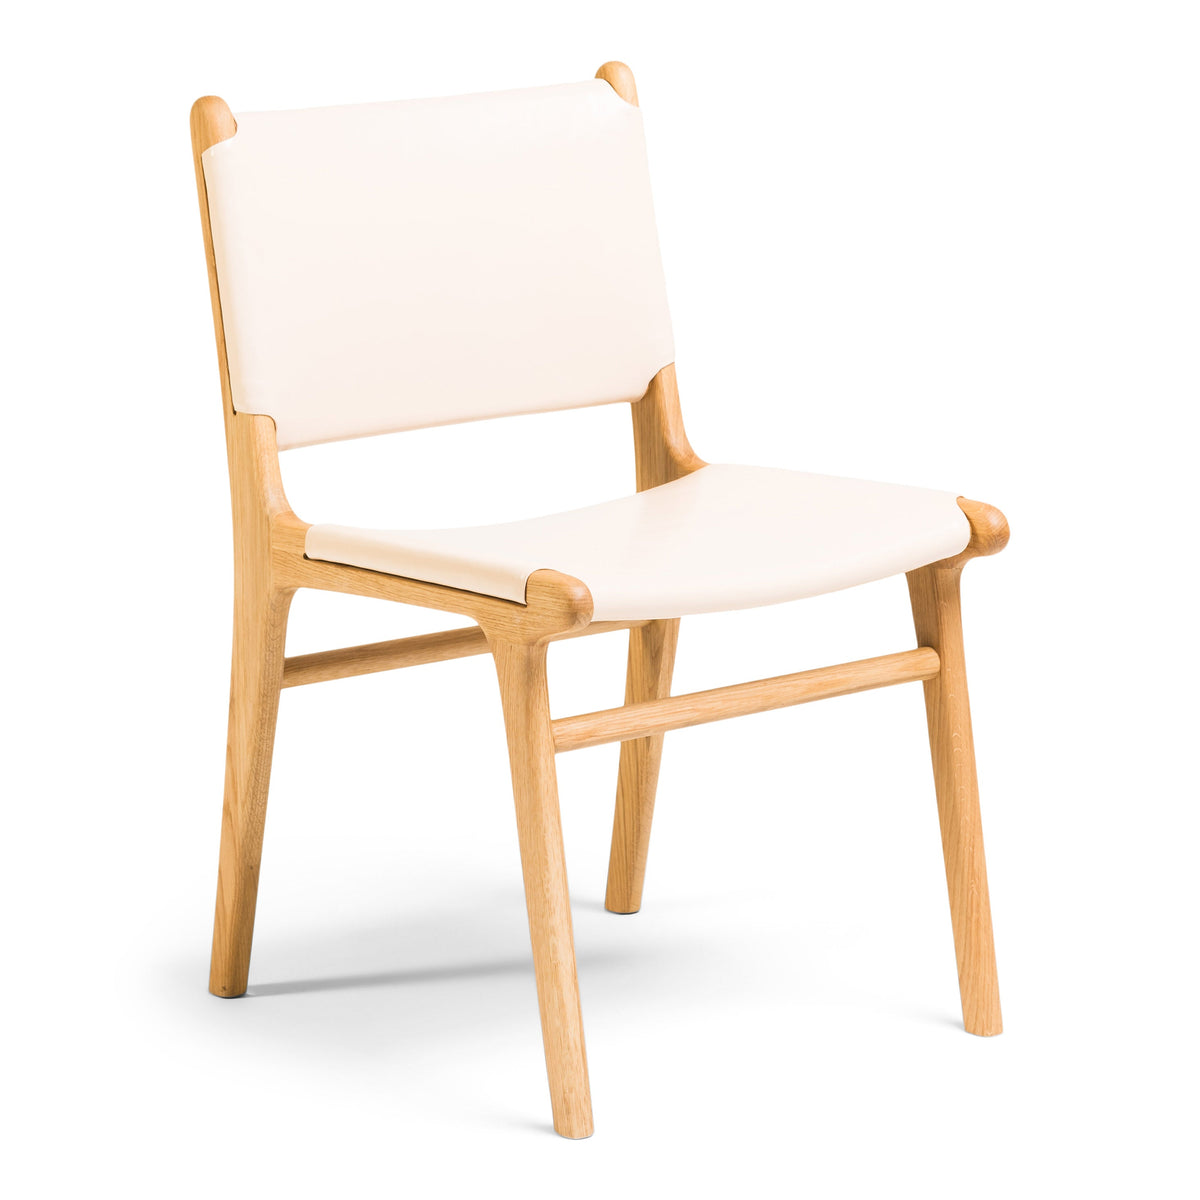 Clearance - Spensley Dining Chair - Rose Blush